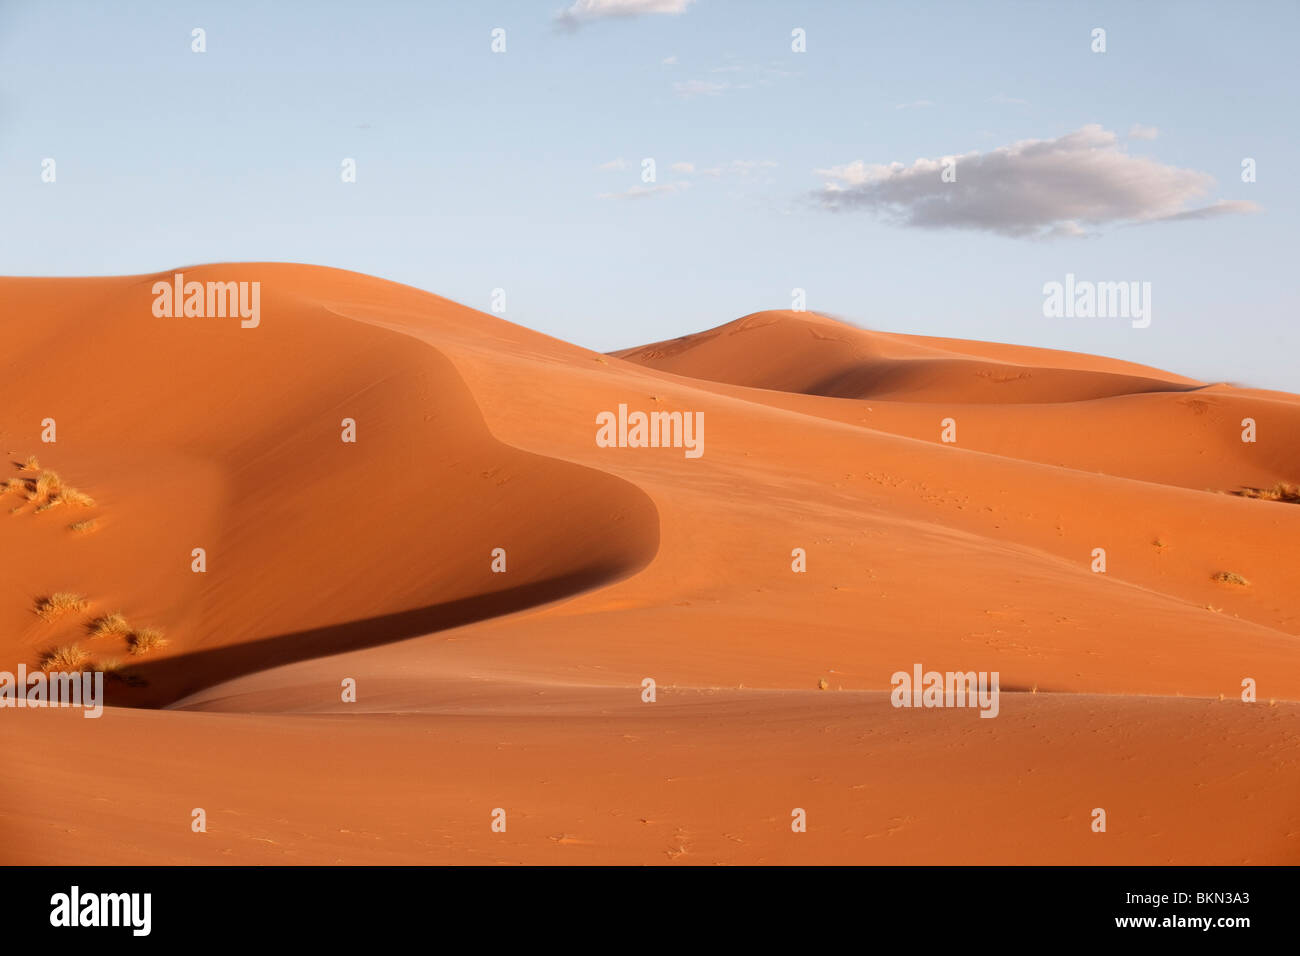 Taken In The Sahara Desert Morocco Composition Of A Dune Drawing Lines And Creating A Cloud Stock Photo Alamy